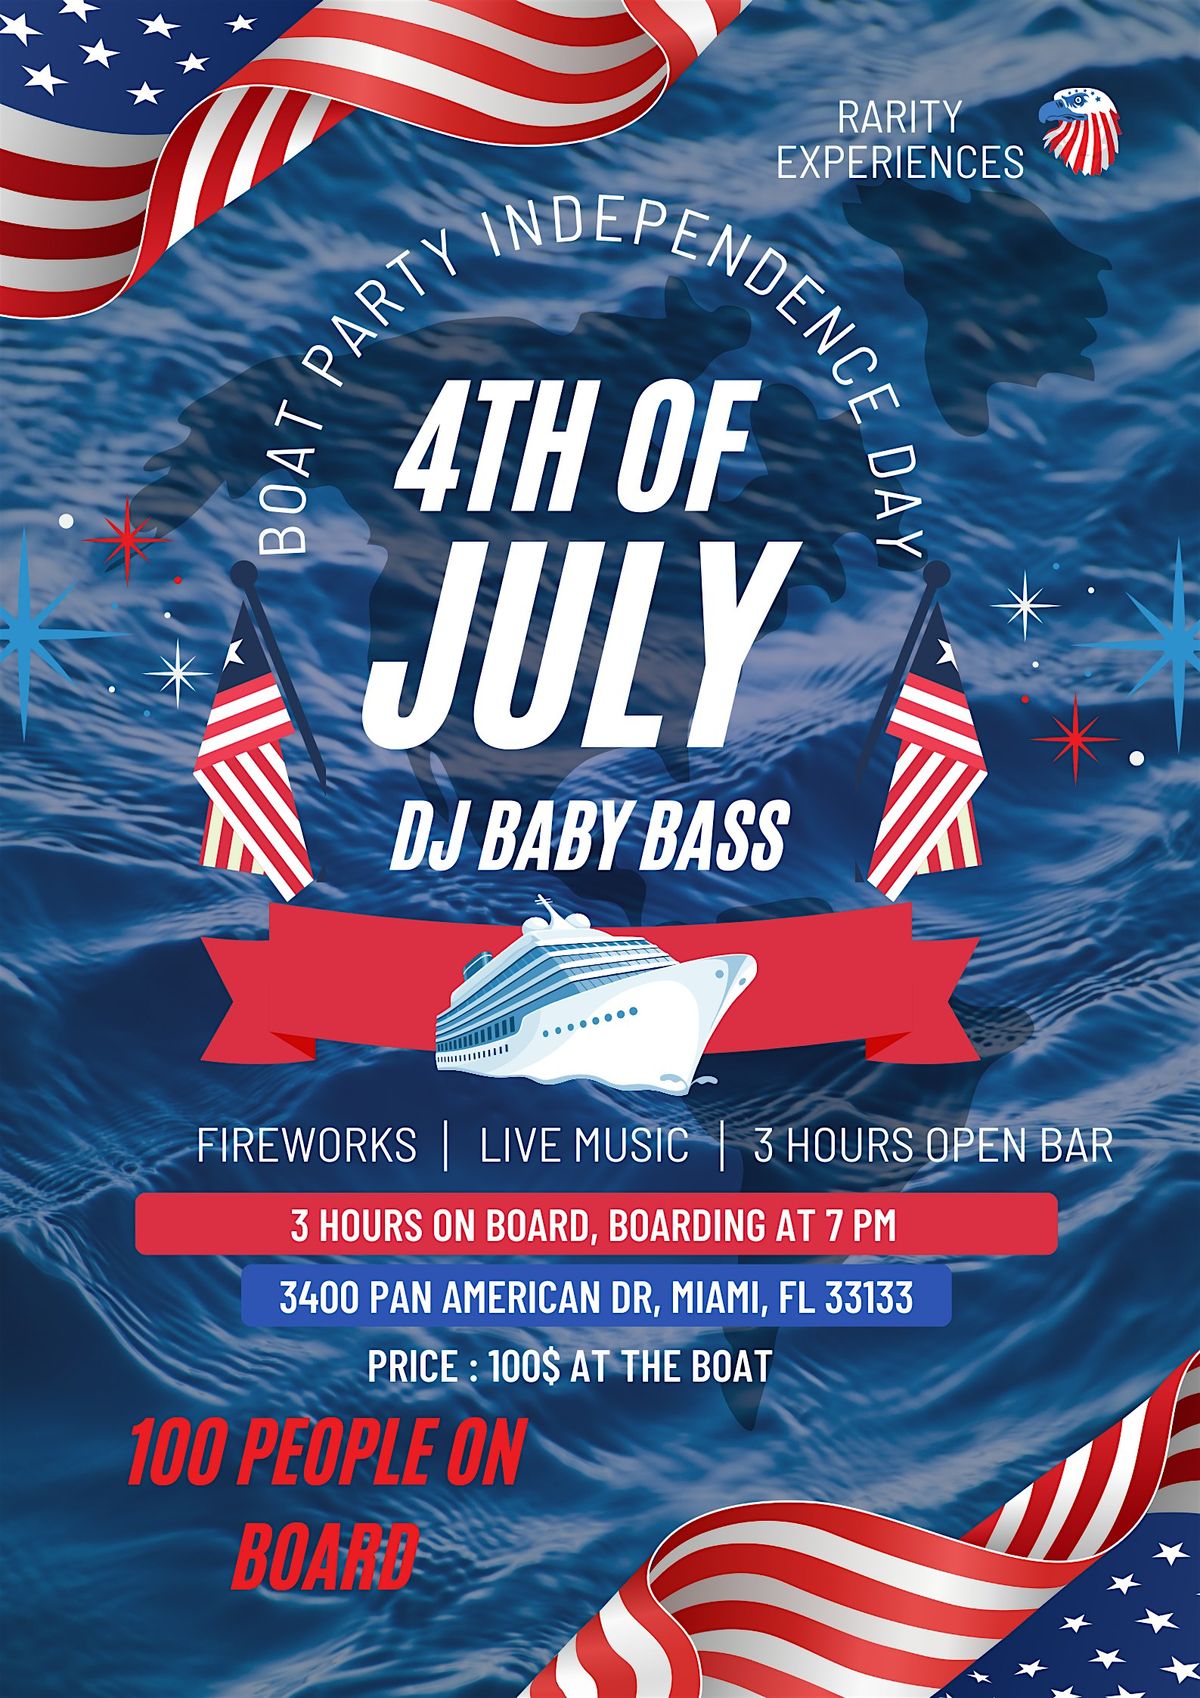 BOAT PARTY MIAMI 4TH OF JULY